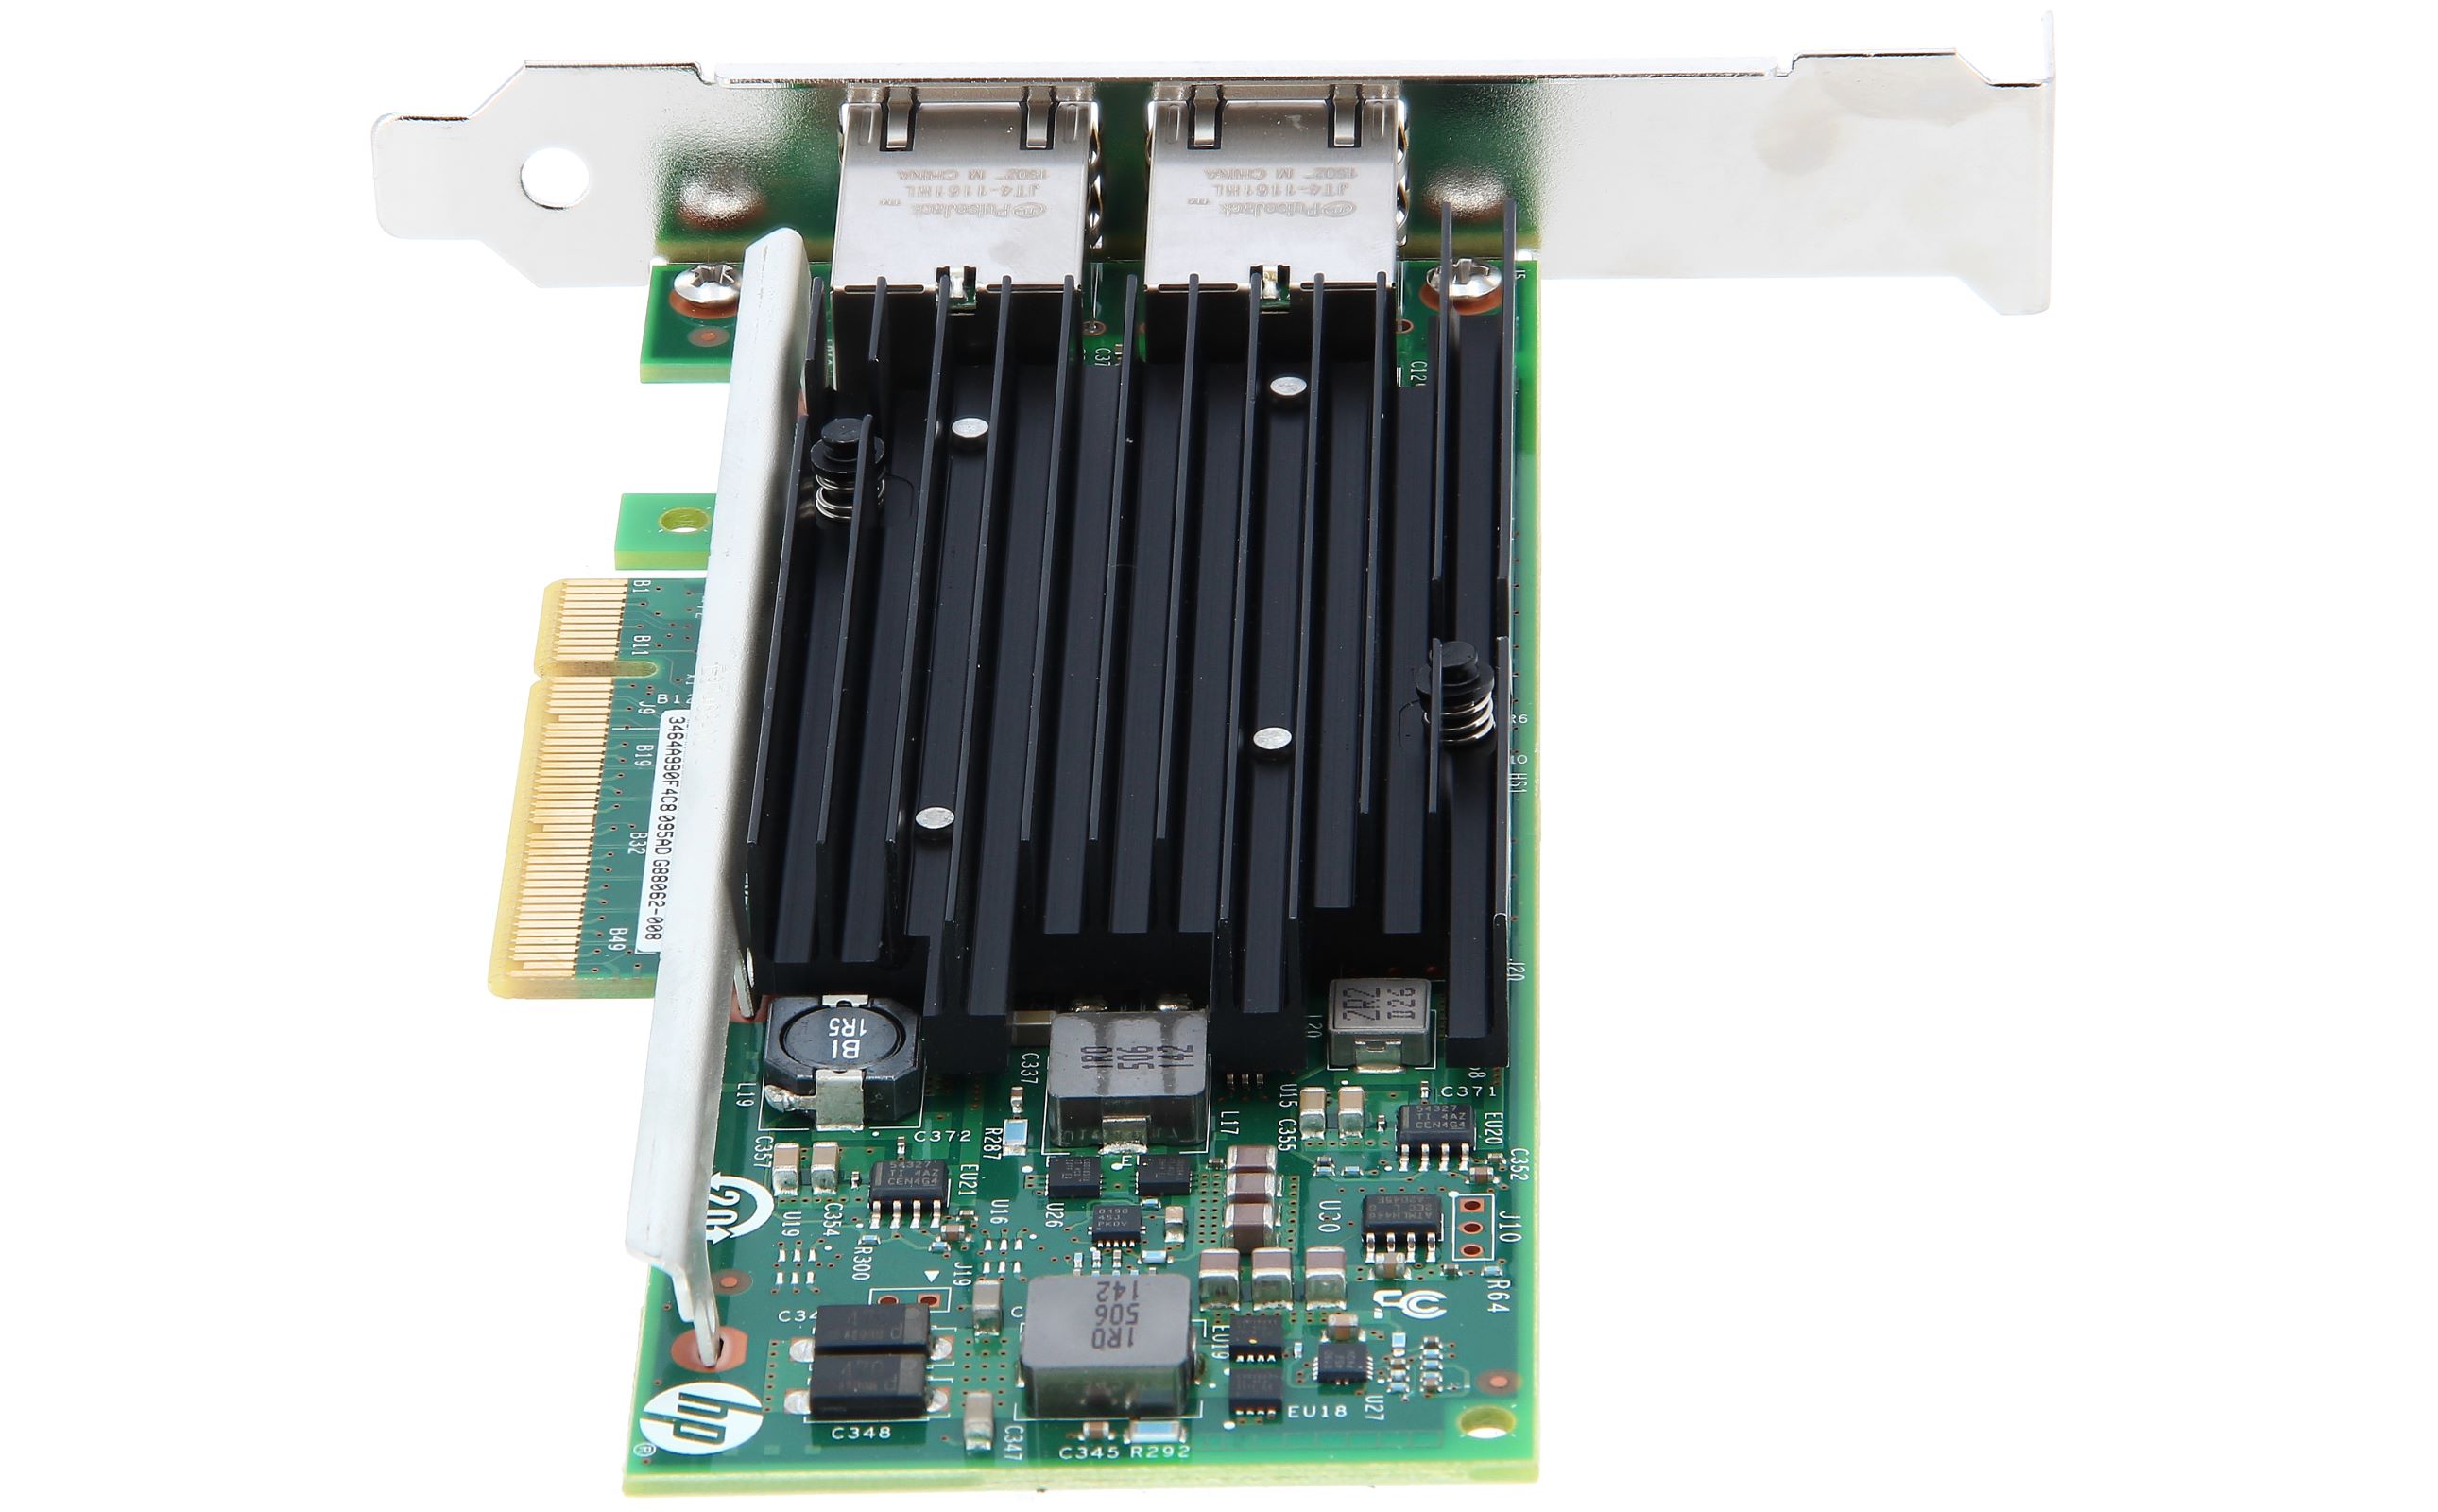 HP 716591-B21 HP Ethernet 10Gb 2-port 561T Adapter new and refurbished  buy online low prices